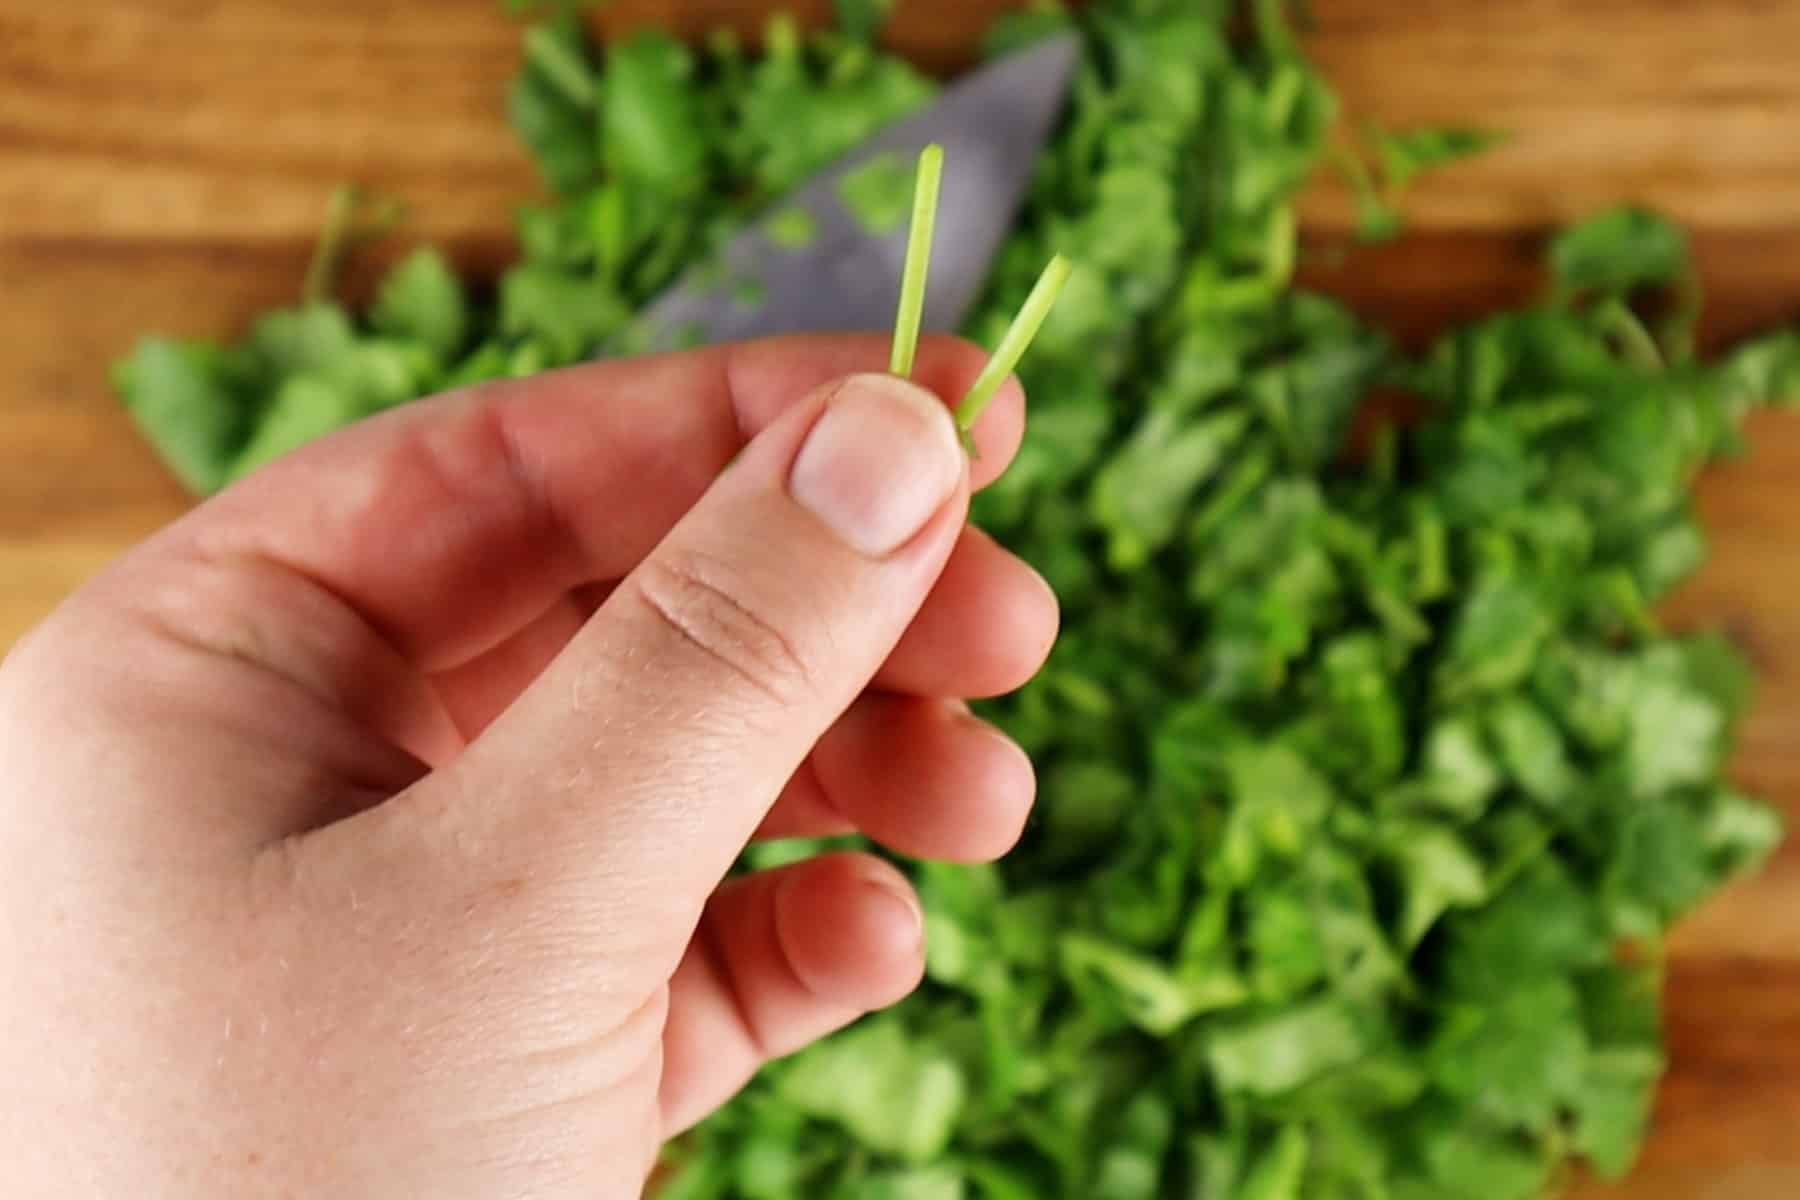 removing stems from cilantro cuttings